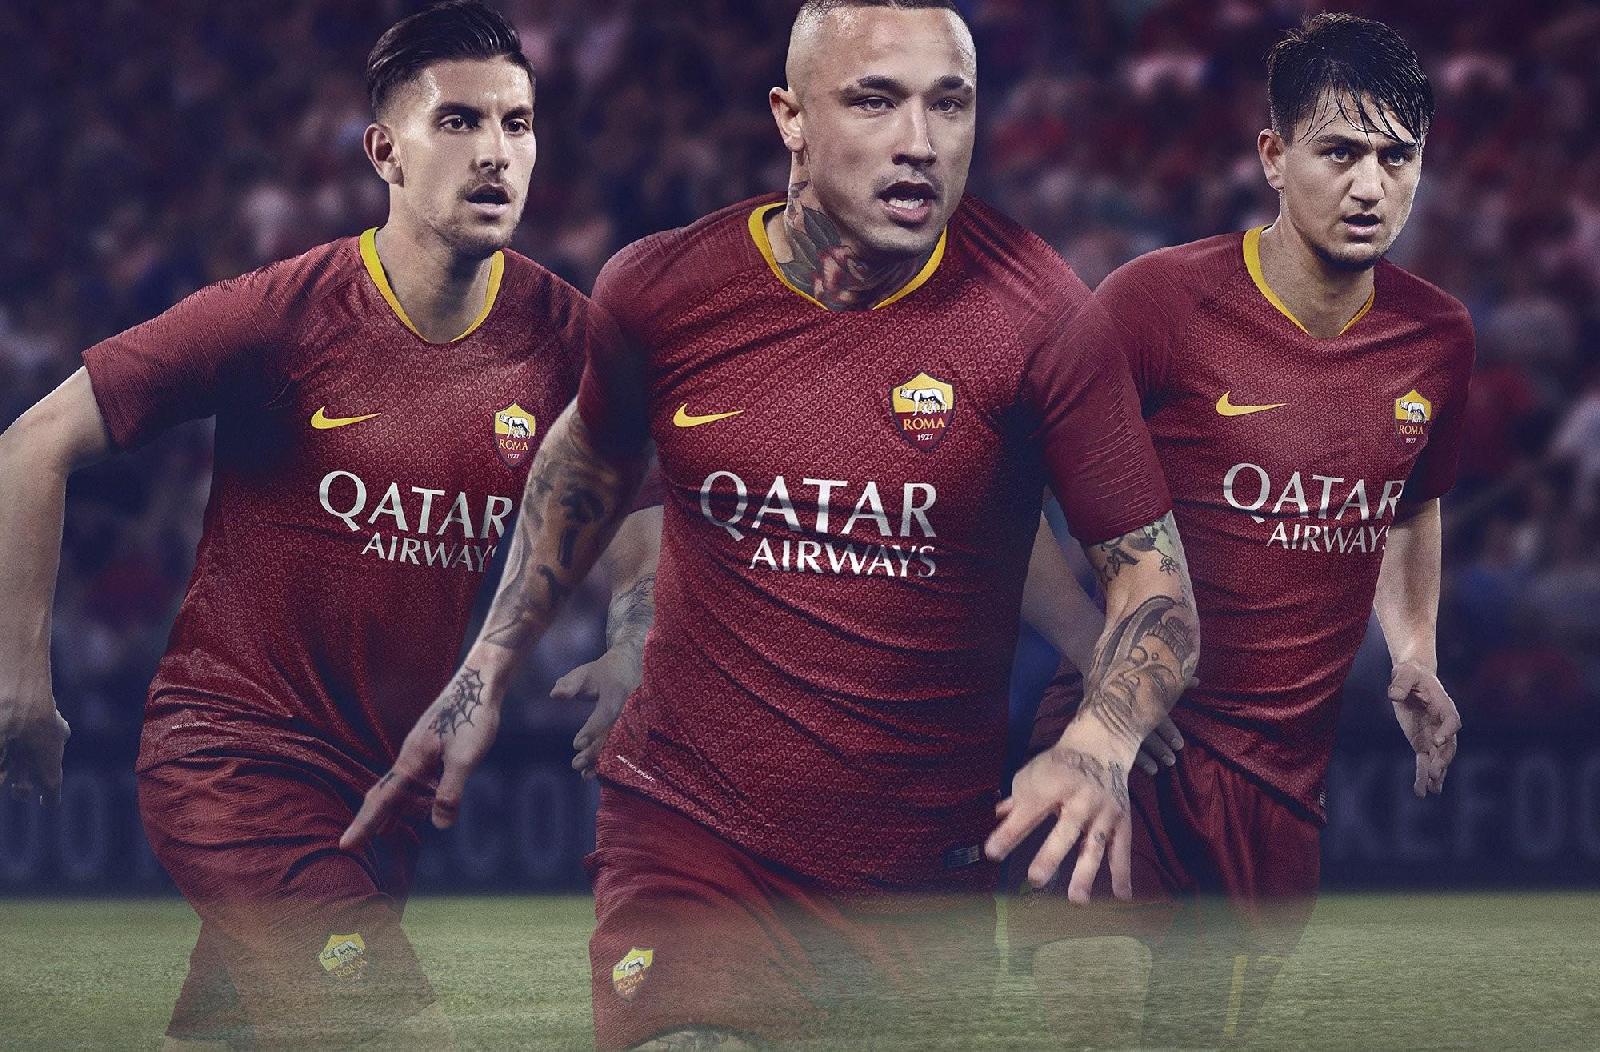 AS Roma published new Nike's home jersey for the 2018/19 season